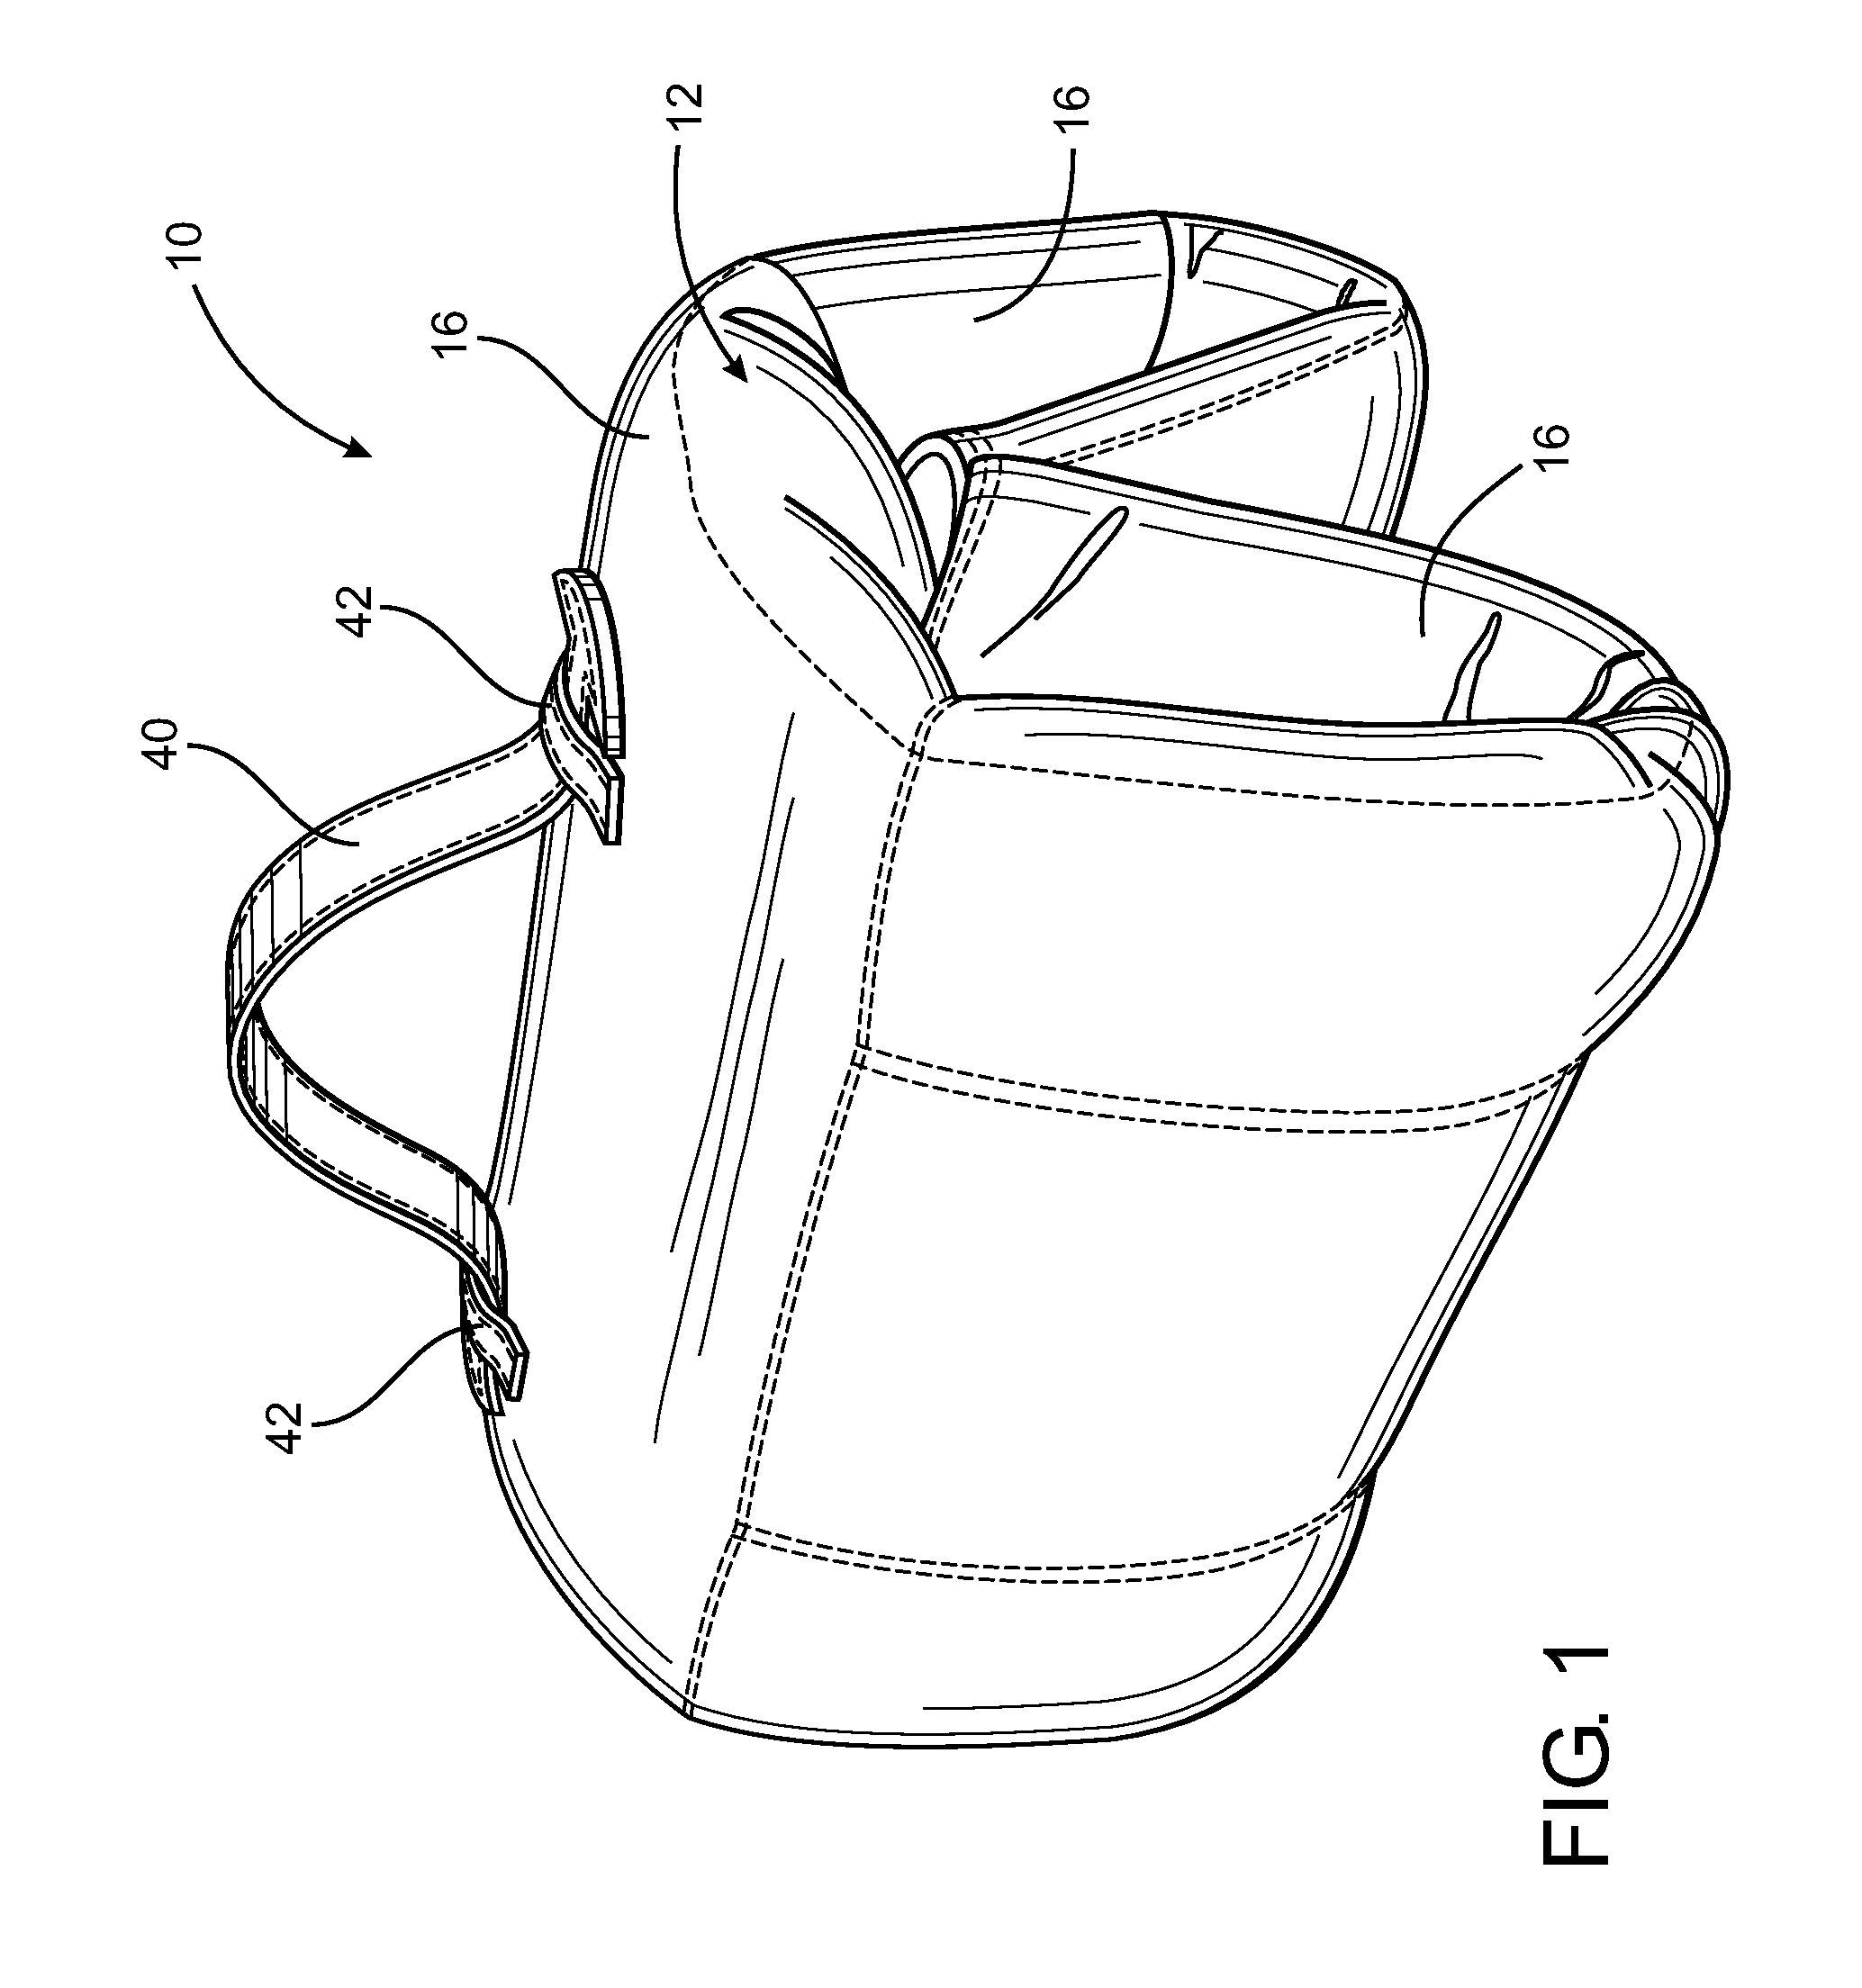 Bag expanding assembly